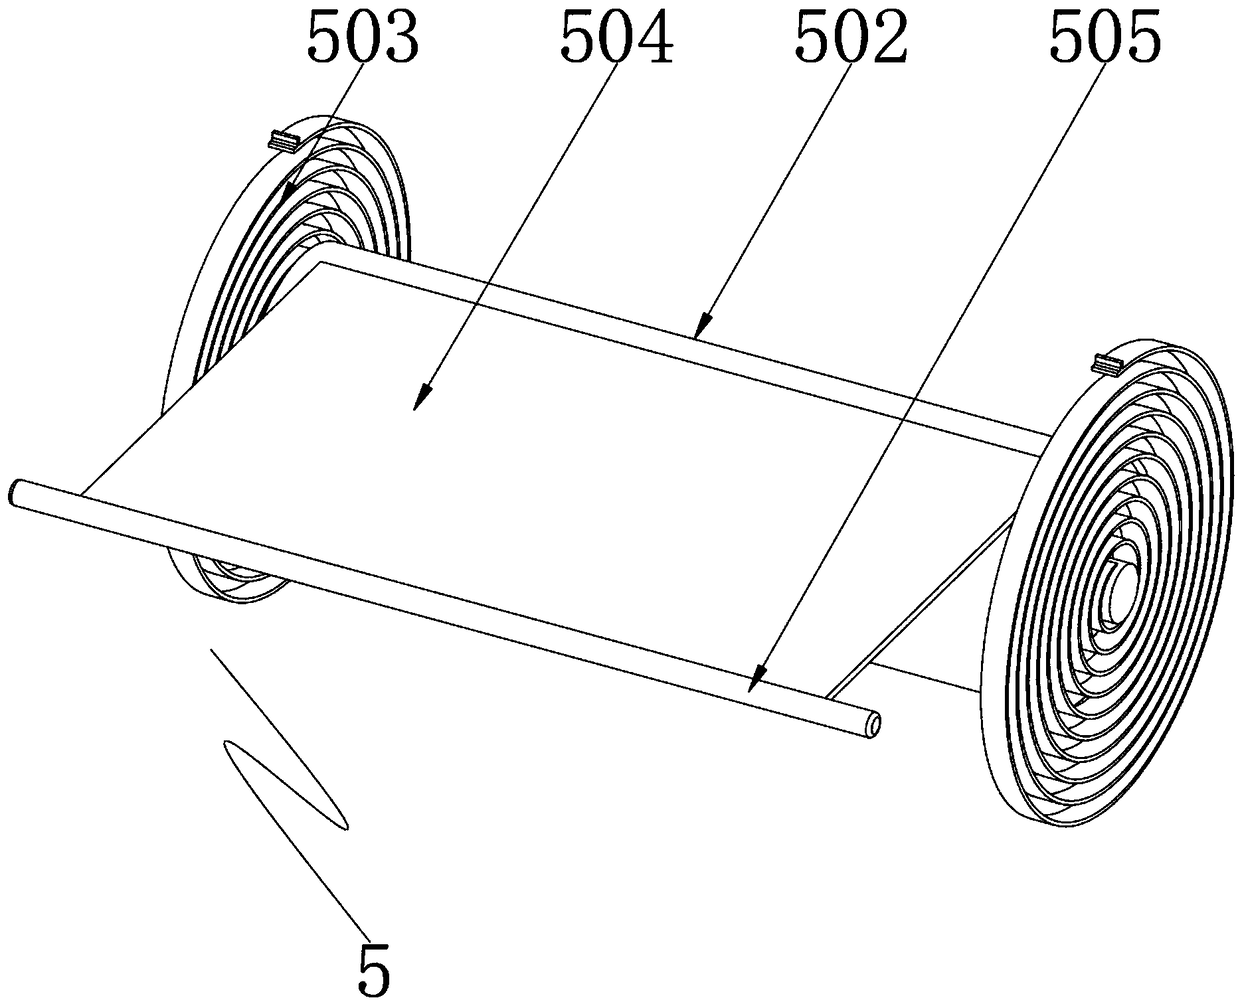 Device for measuring metal linear expansion coefficient based on pinhole imaging